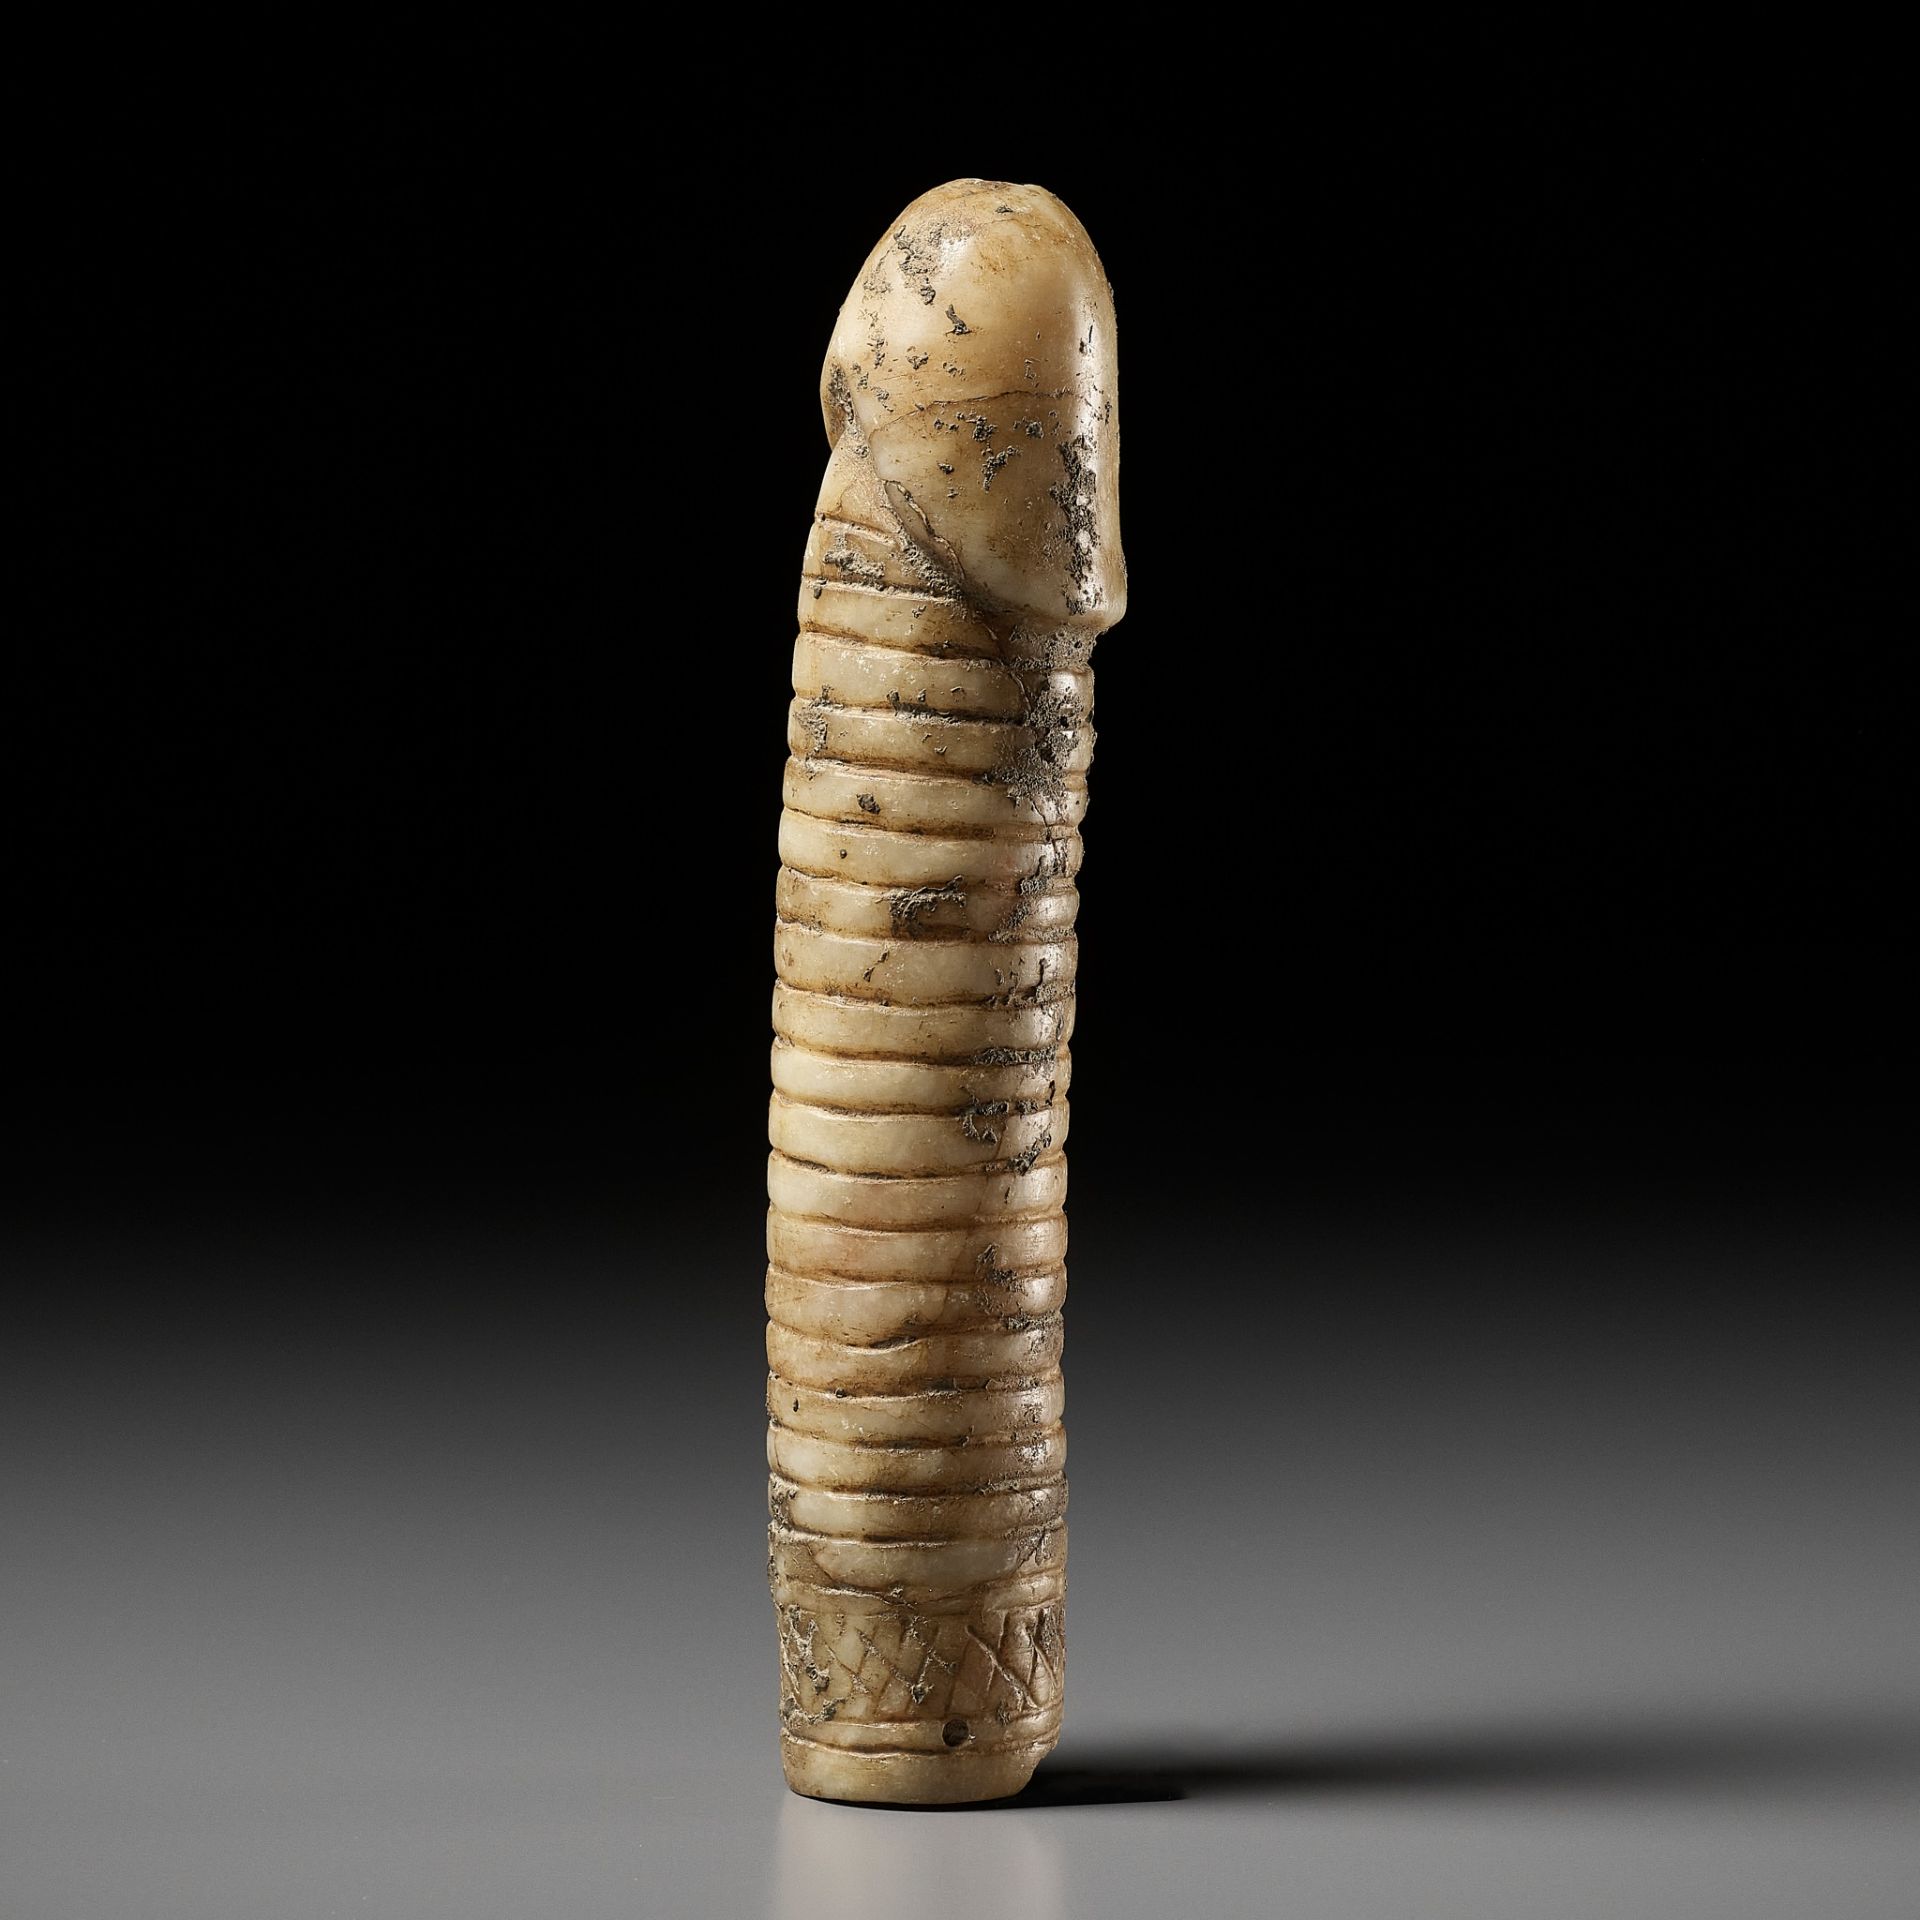 A RARE WHITE MARBLE CARVING OF A PHALLUS, WESTERN HAN DYNASTY